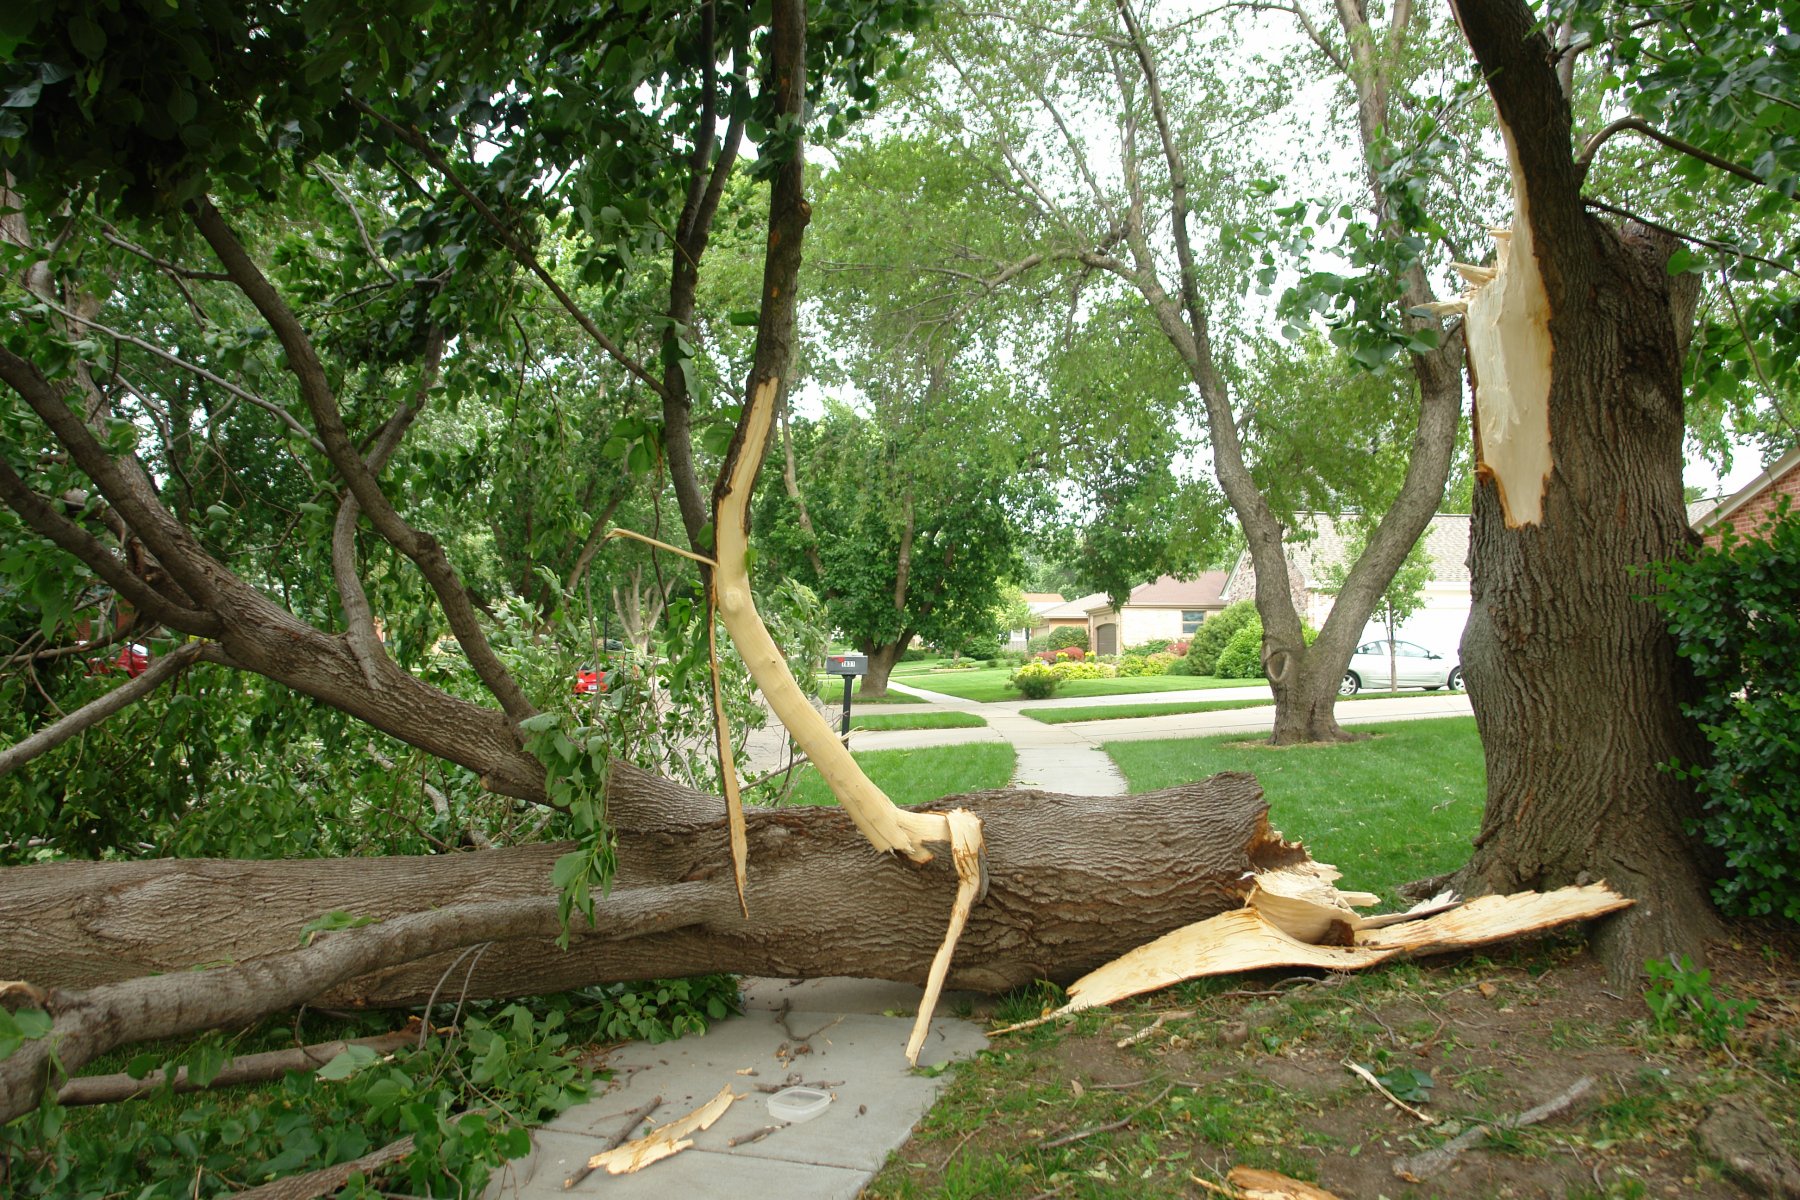 A large treee, fallen at the trunk, lays across a sidewalk.